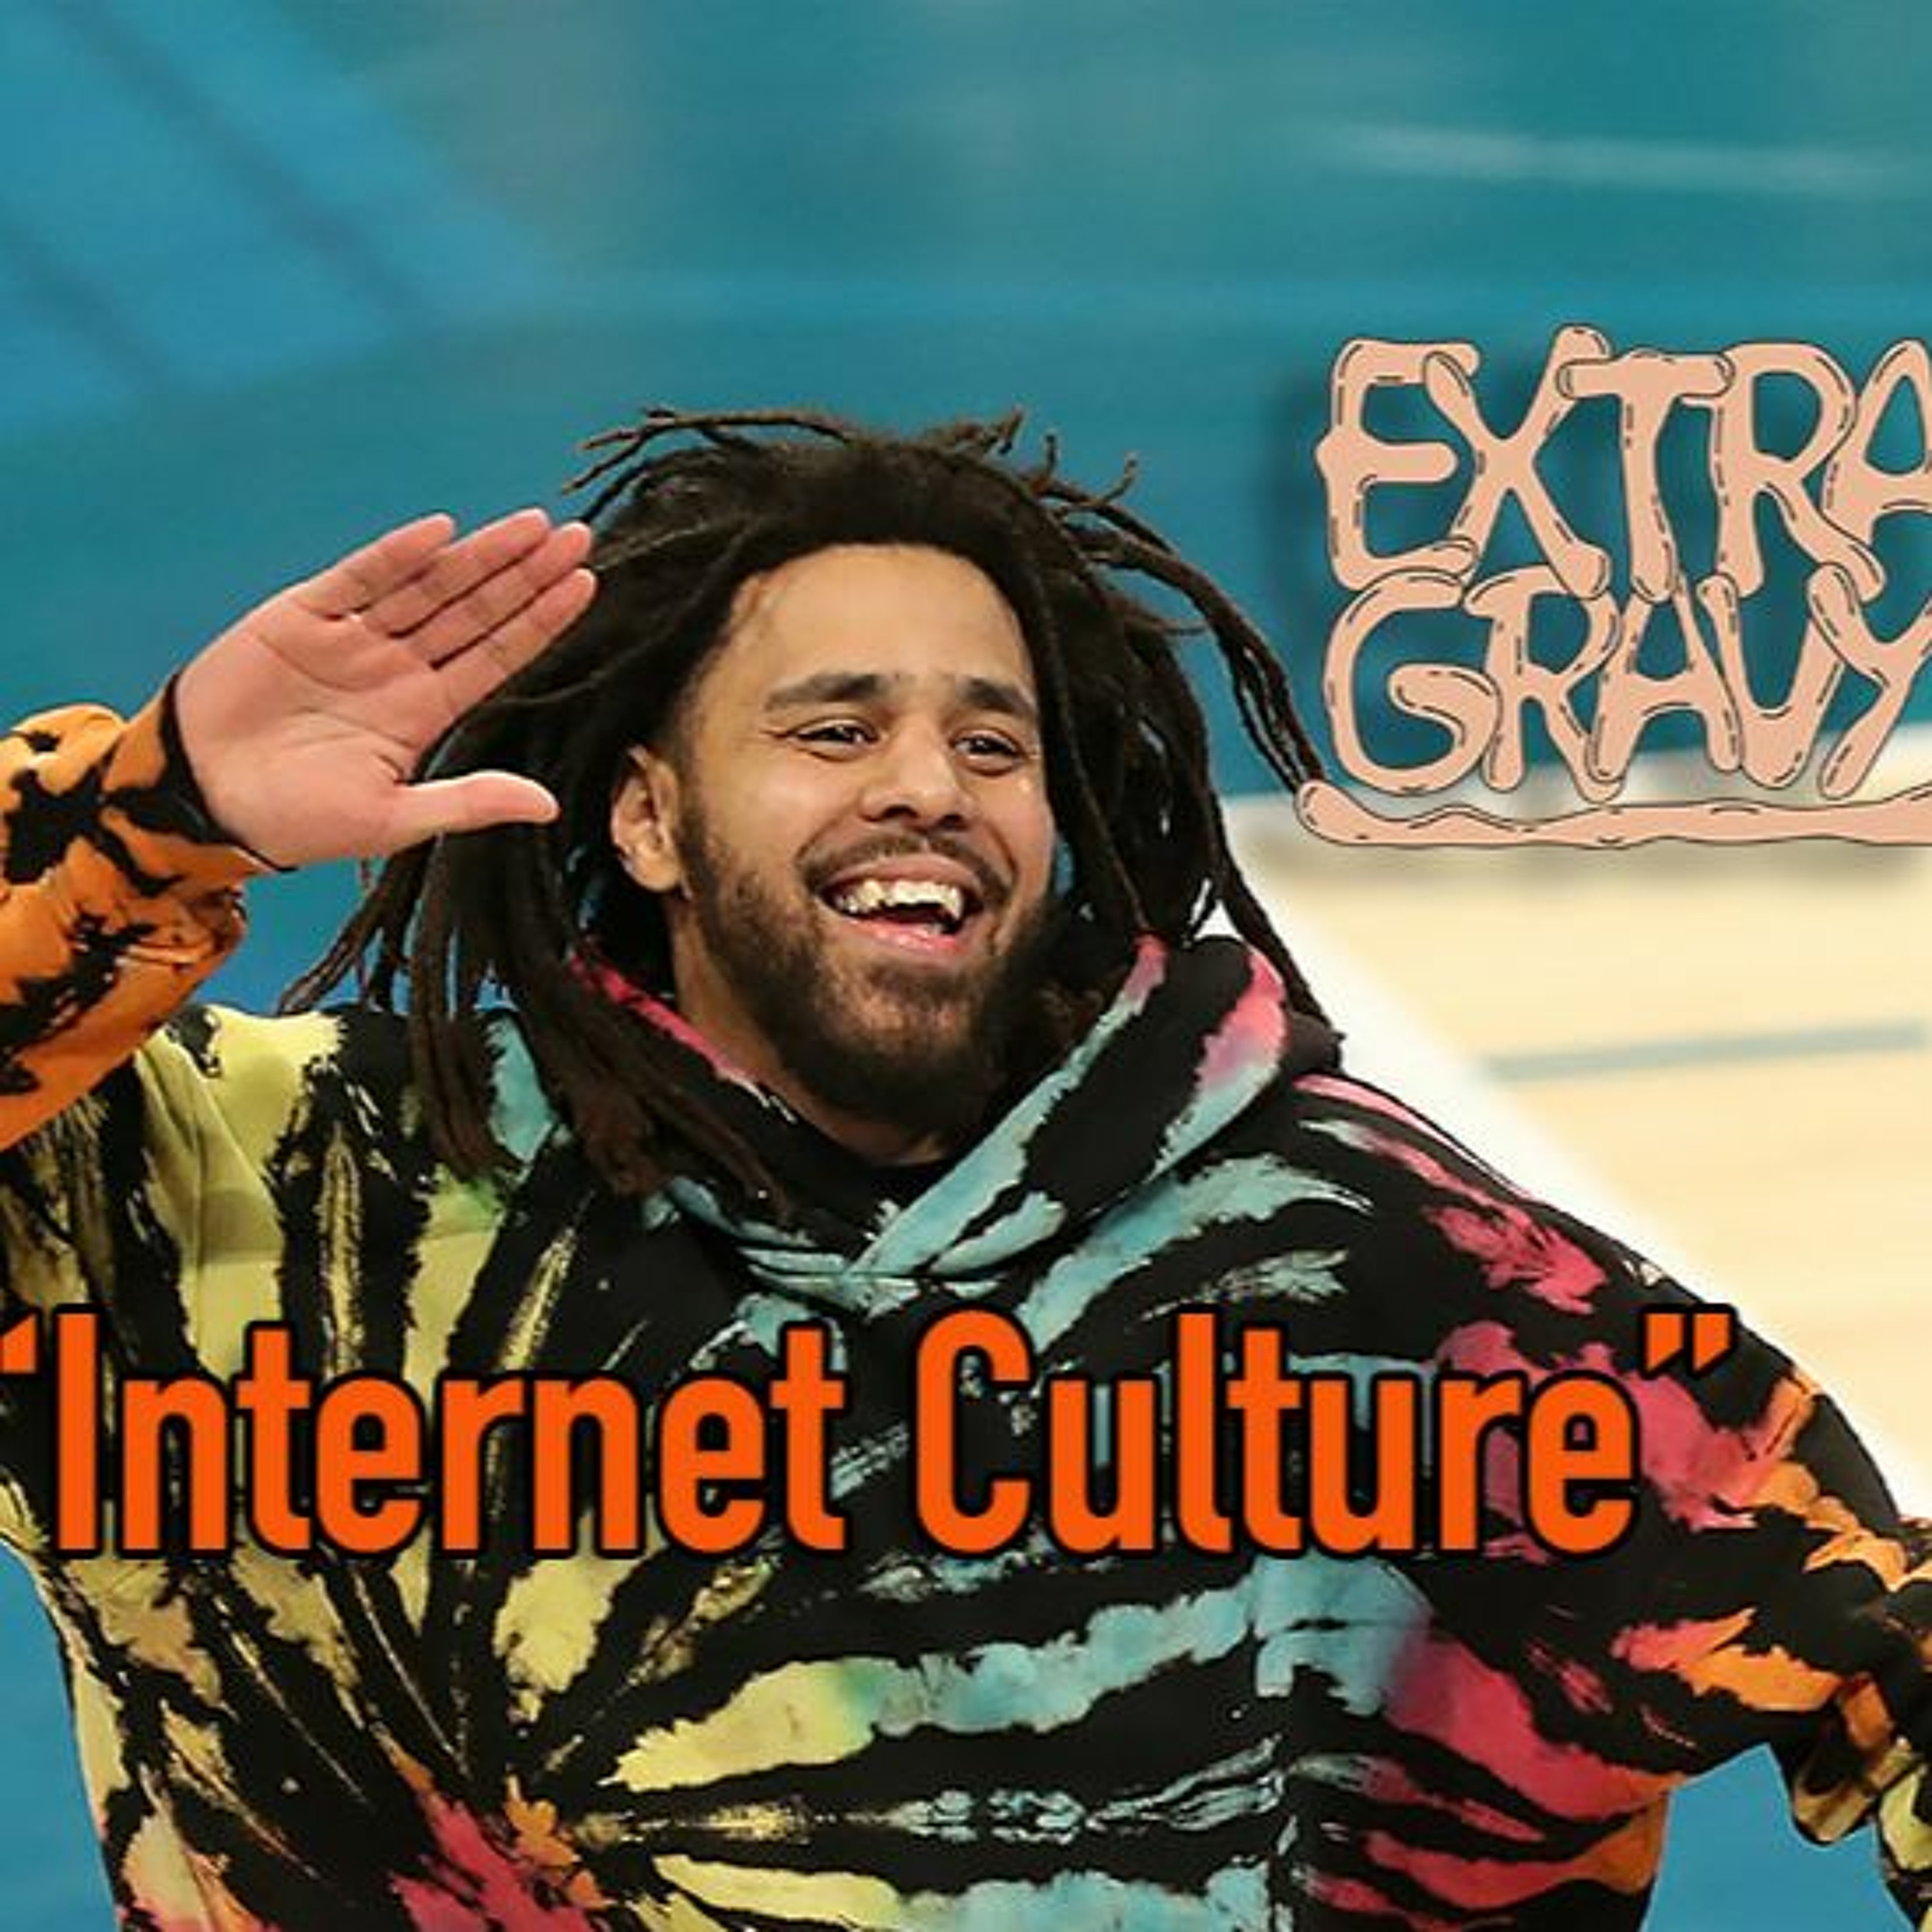 Thumbnail for "Internet Culture".